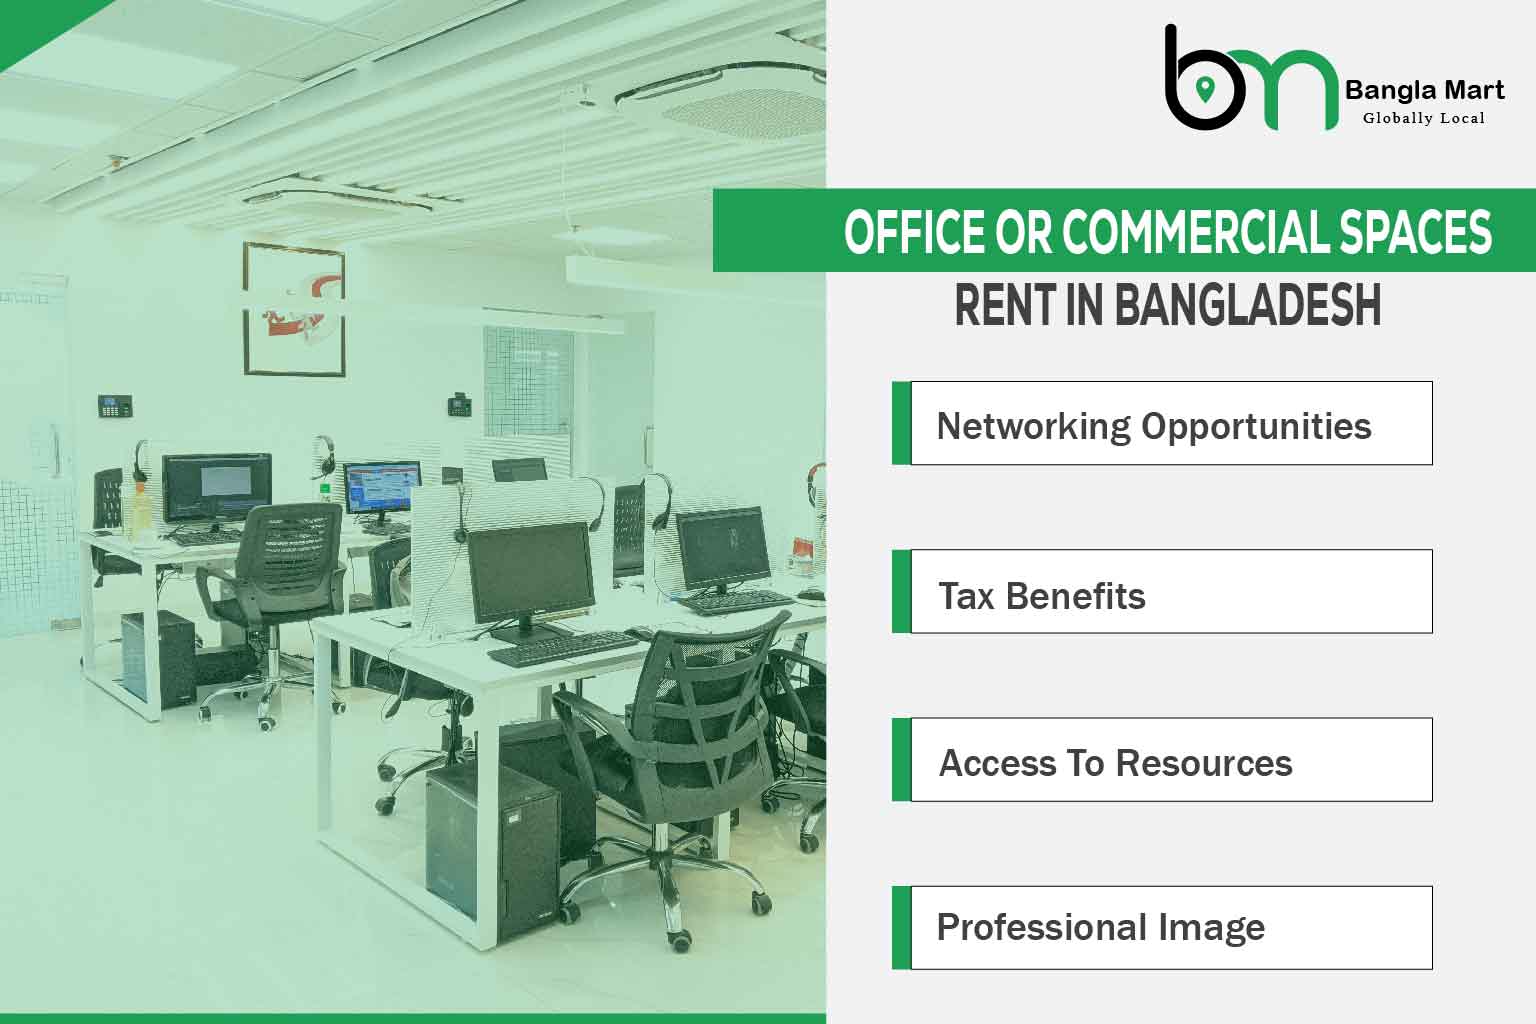 Office Or Commercial Spaces Rent in Bangladesh